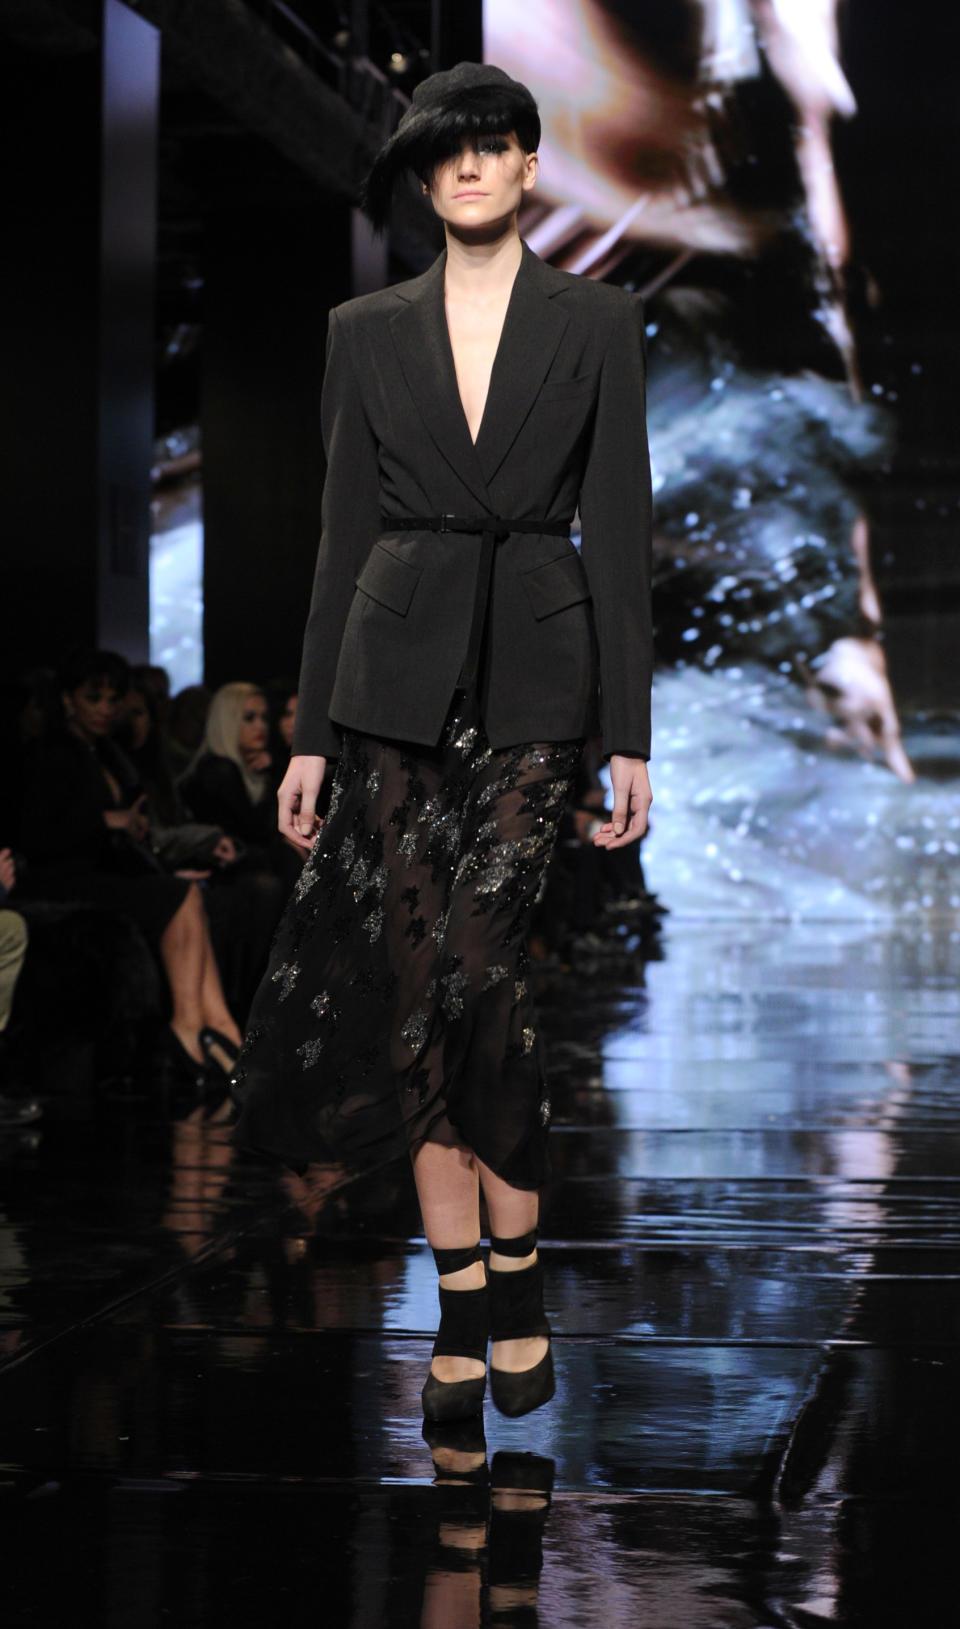 The Donna Karan New York Fall 2014 collection is modeled during Fashion Week, Monday, Feb. 10, 2014, at 23 Wall Street in New York. (AP Photo/Diane Bondareff)